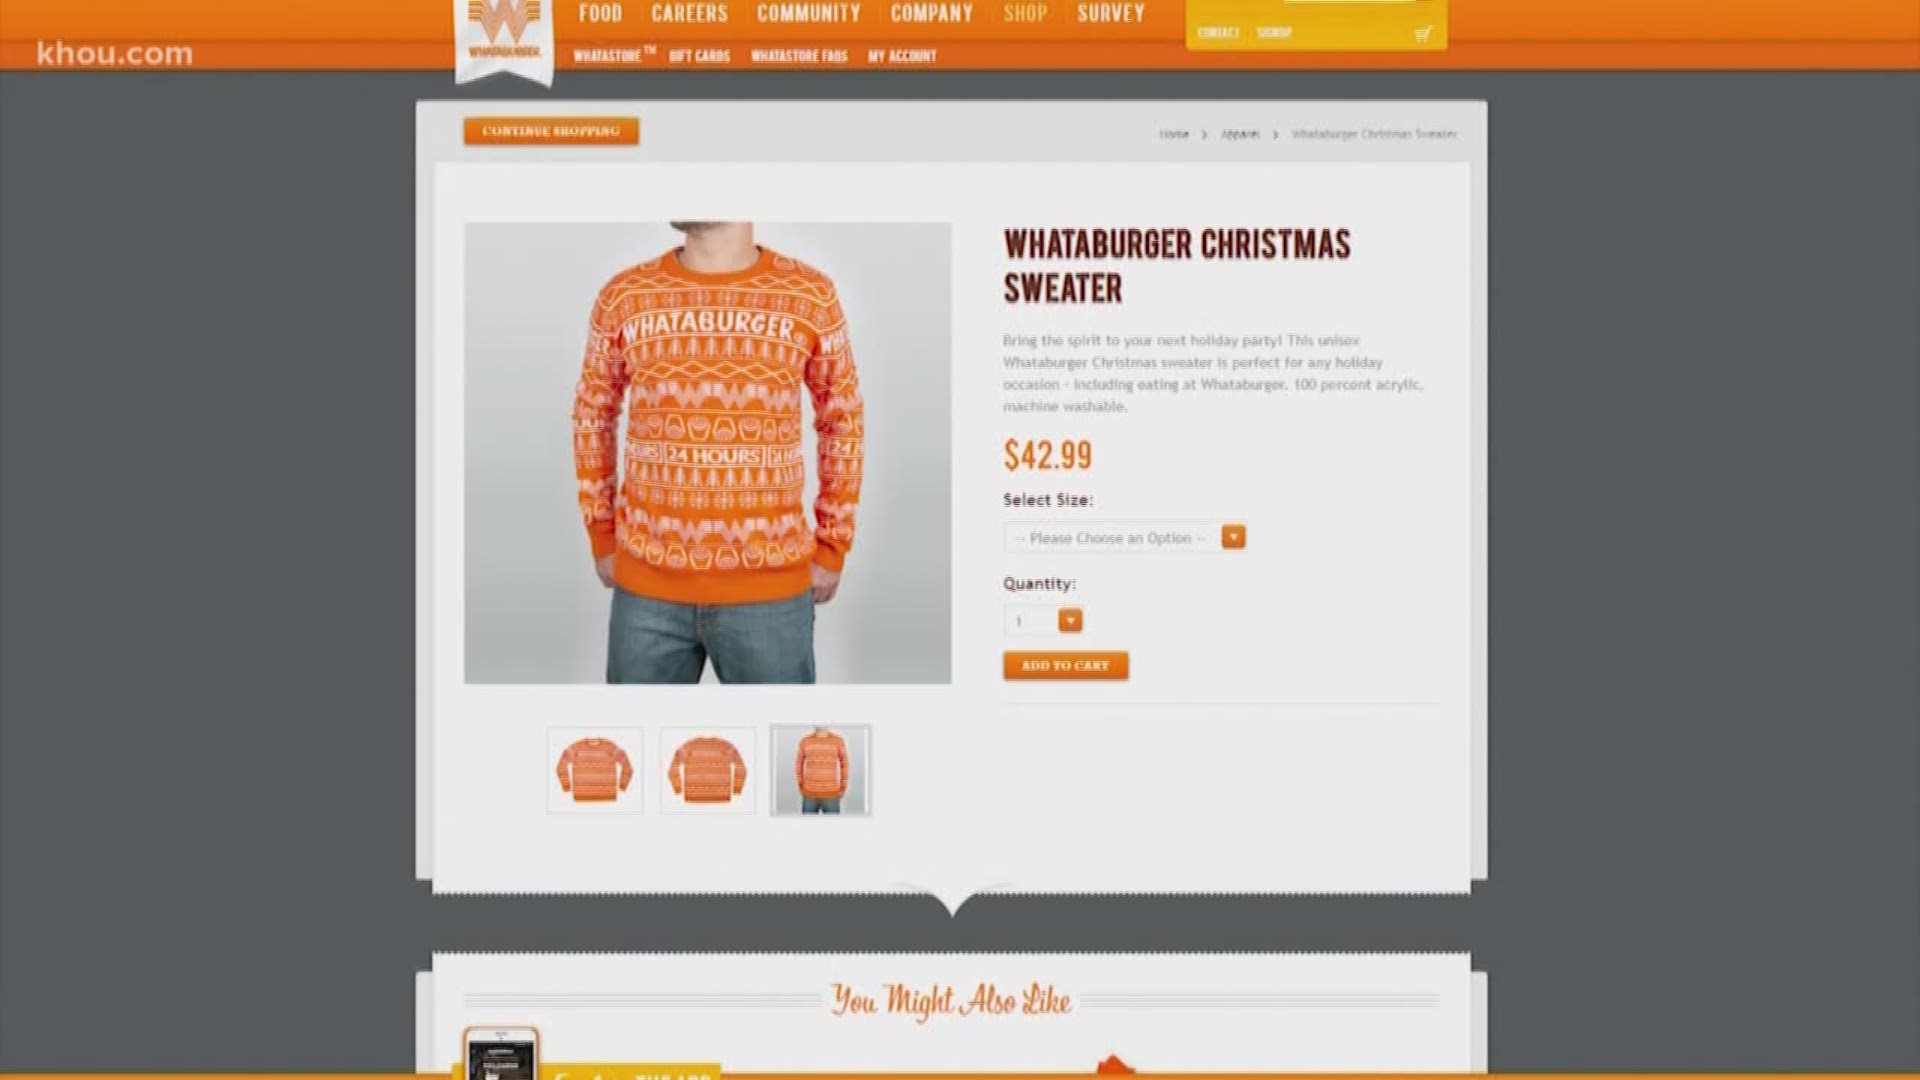 The popular burger chain just dropped some new swag on their website. They are selling unisex Whataburger Christmas sweaters for $42.99.